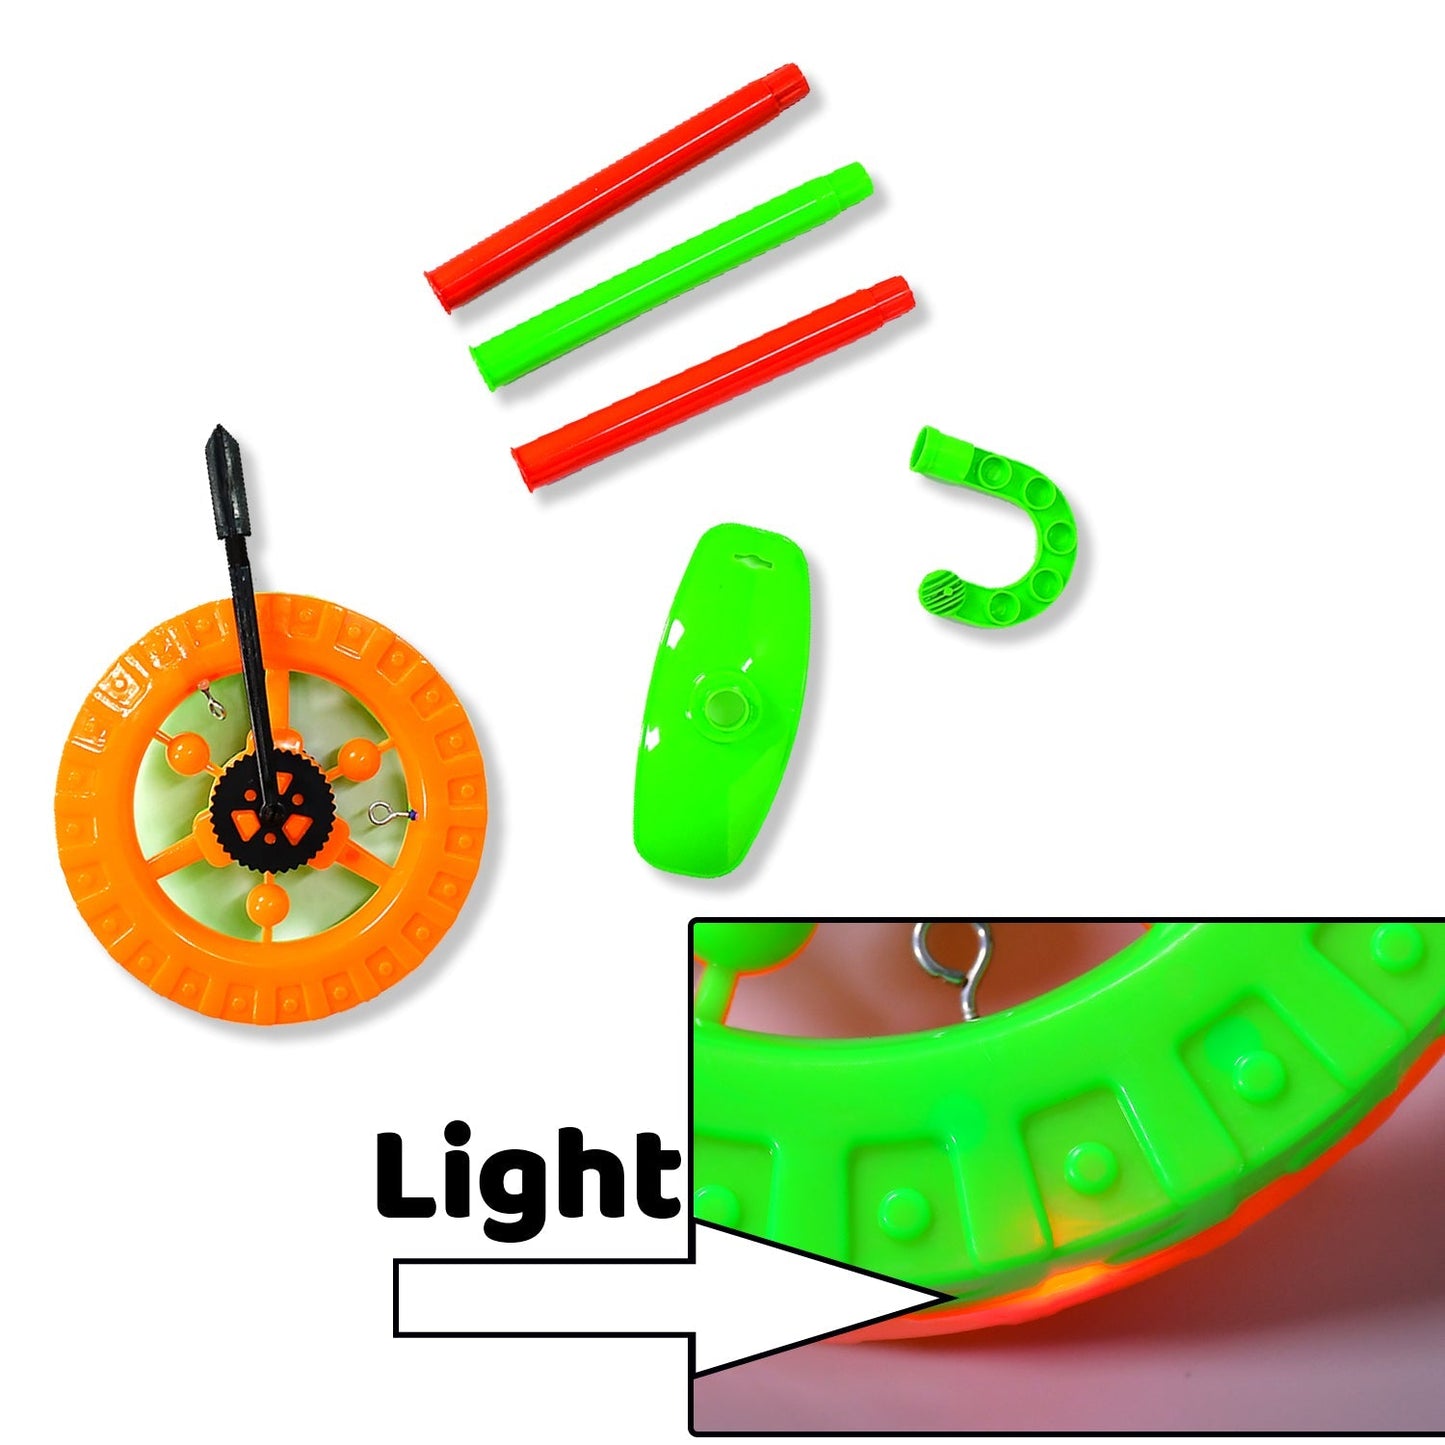 4435 Plastic Single Wheel Push Run toy with handle and two lights on wheel. push toy for Kids. DeoDap